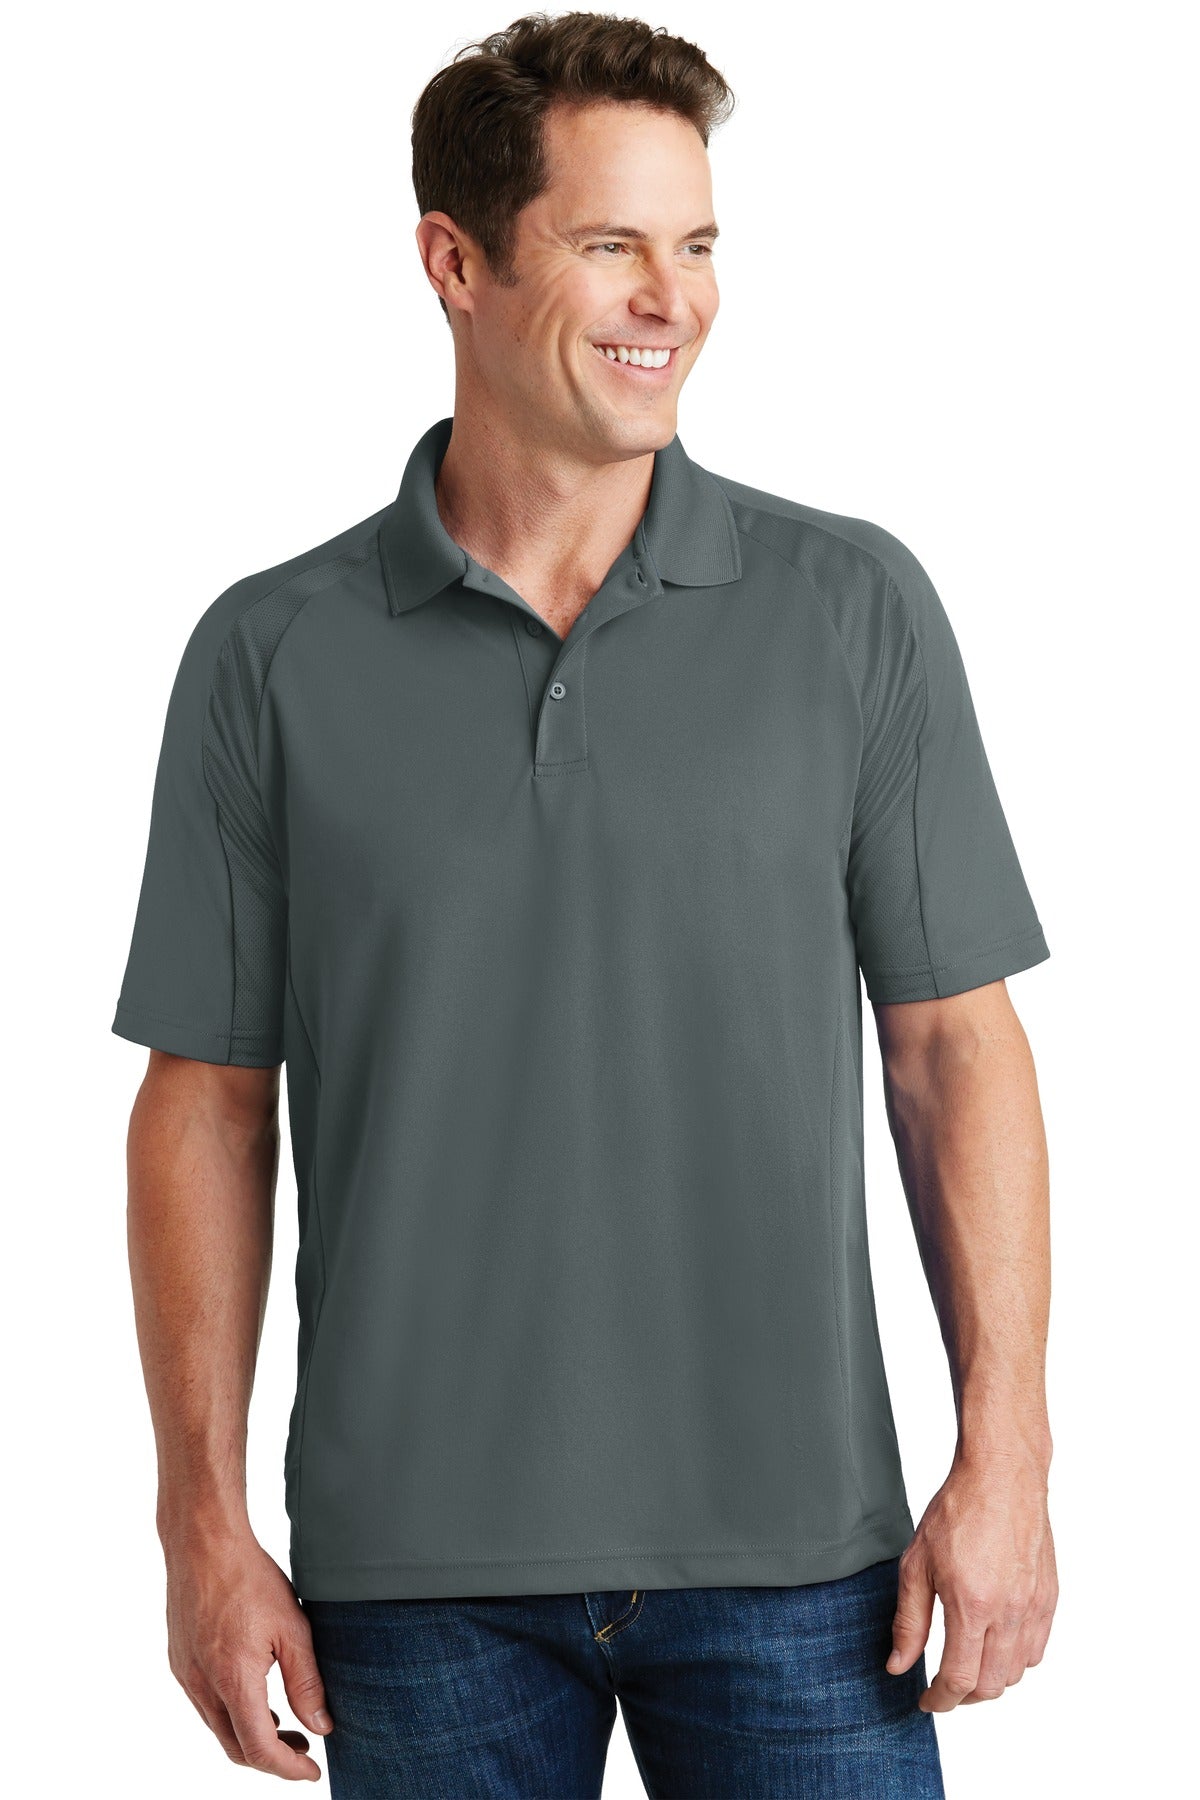 Photo of Sport-Tek Polos/Knits T474  color  Steel